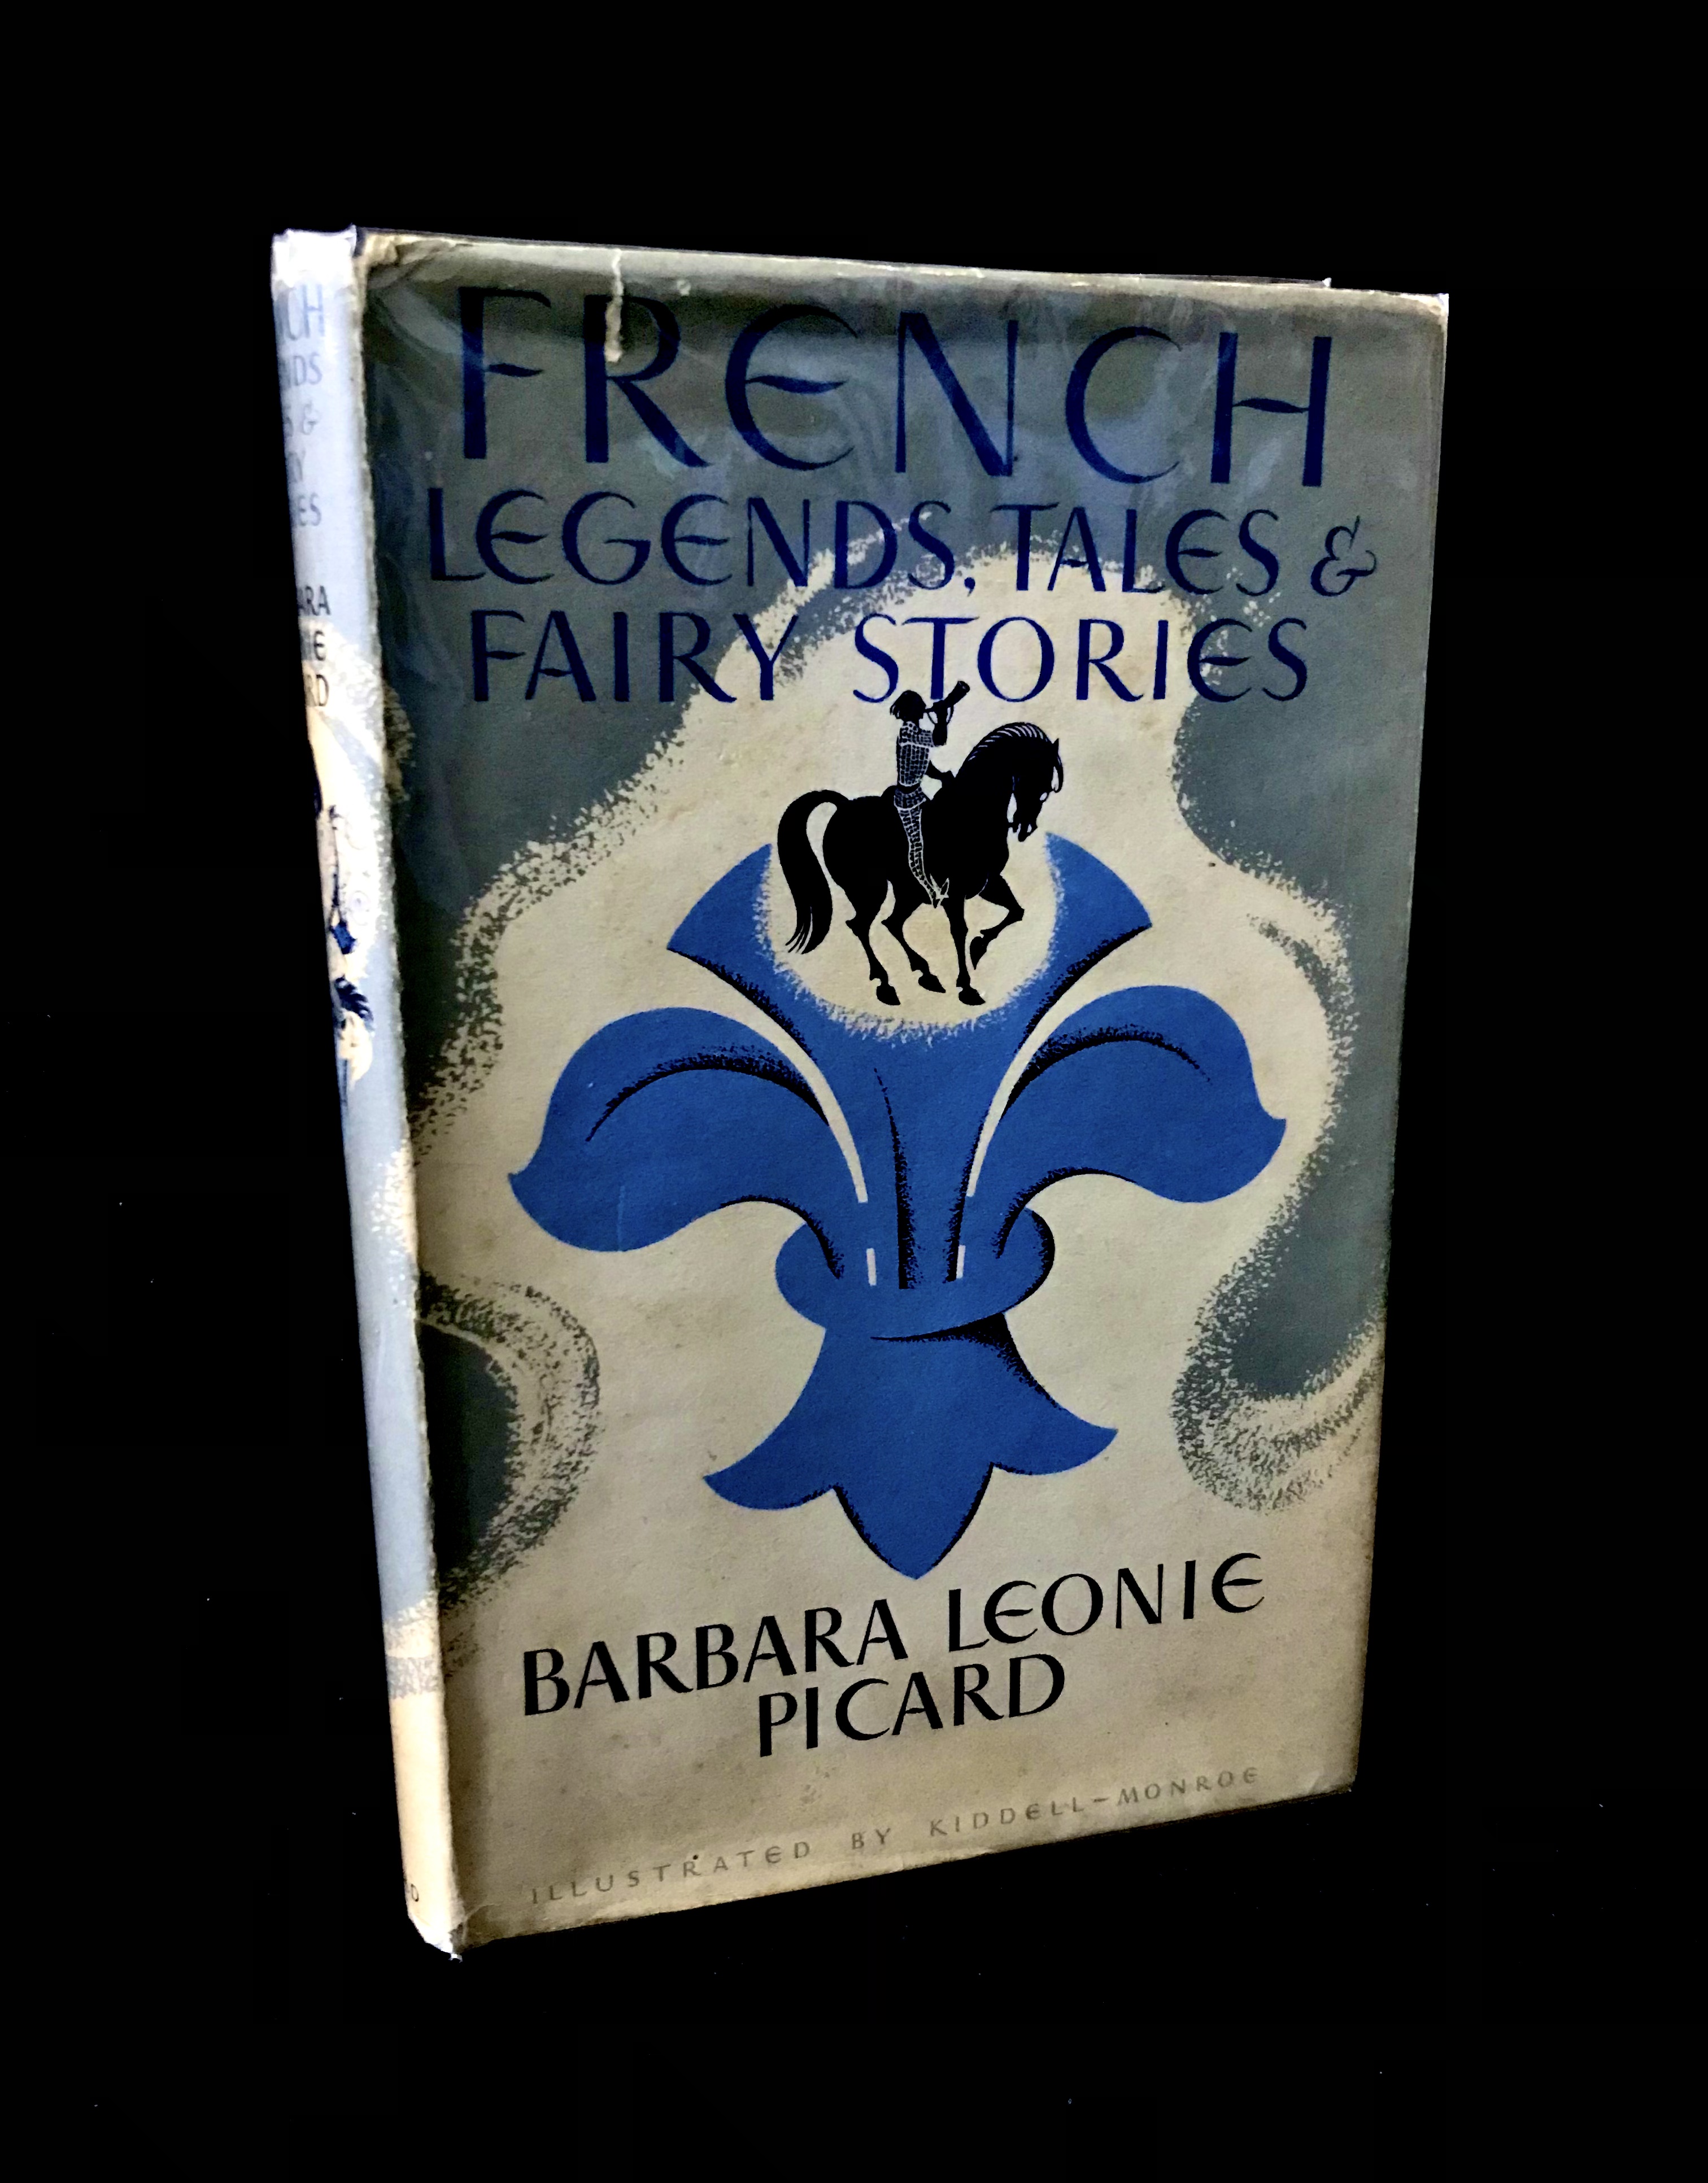 French Legends, Tales, & Fairy Stories by Barbara Leonie Picard